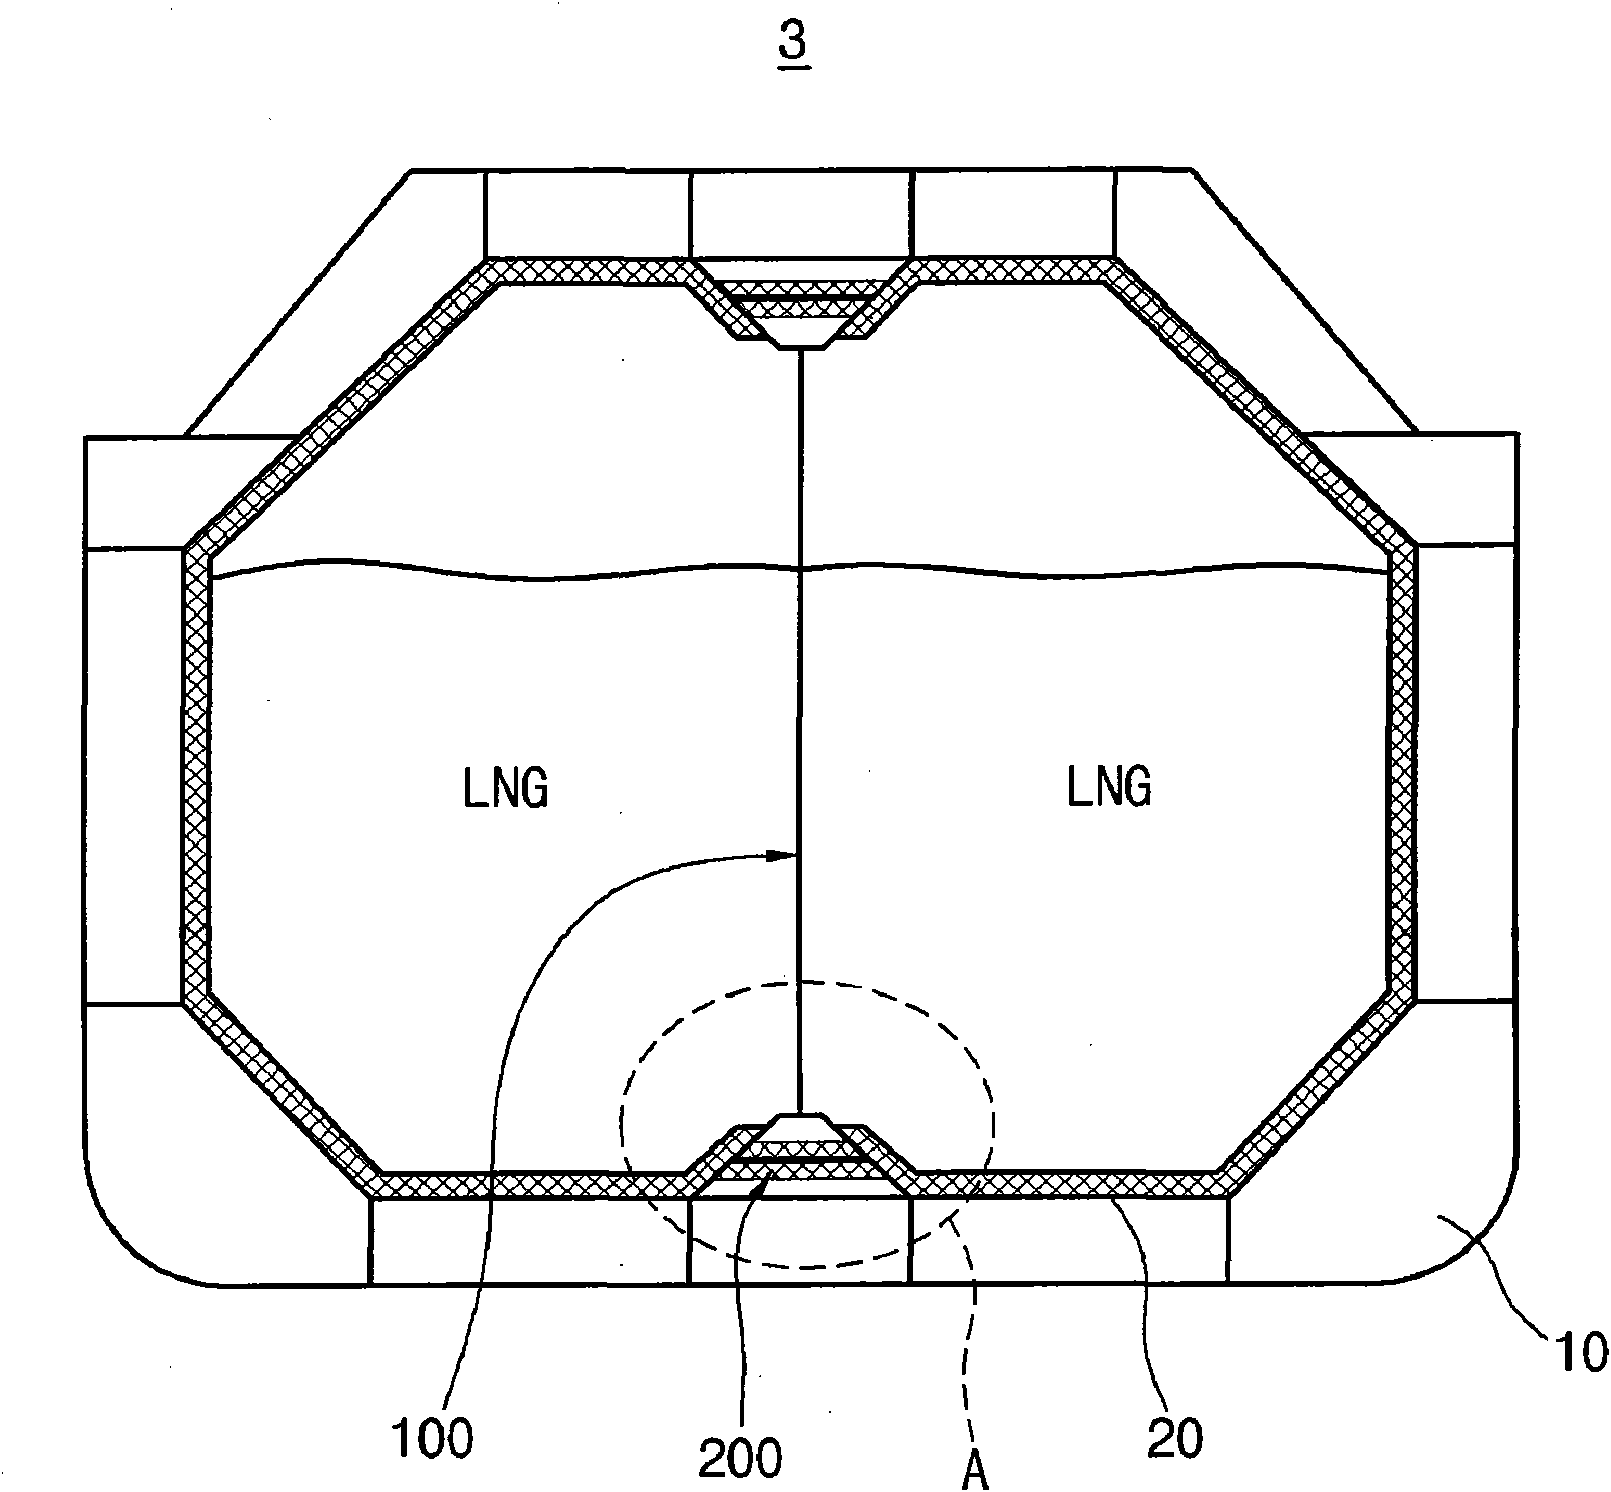 Anti-sloshing structure for lng cargo tank